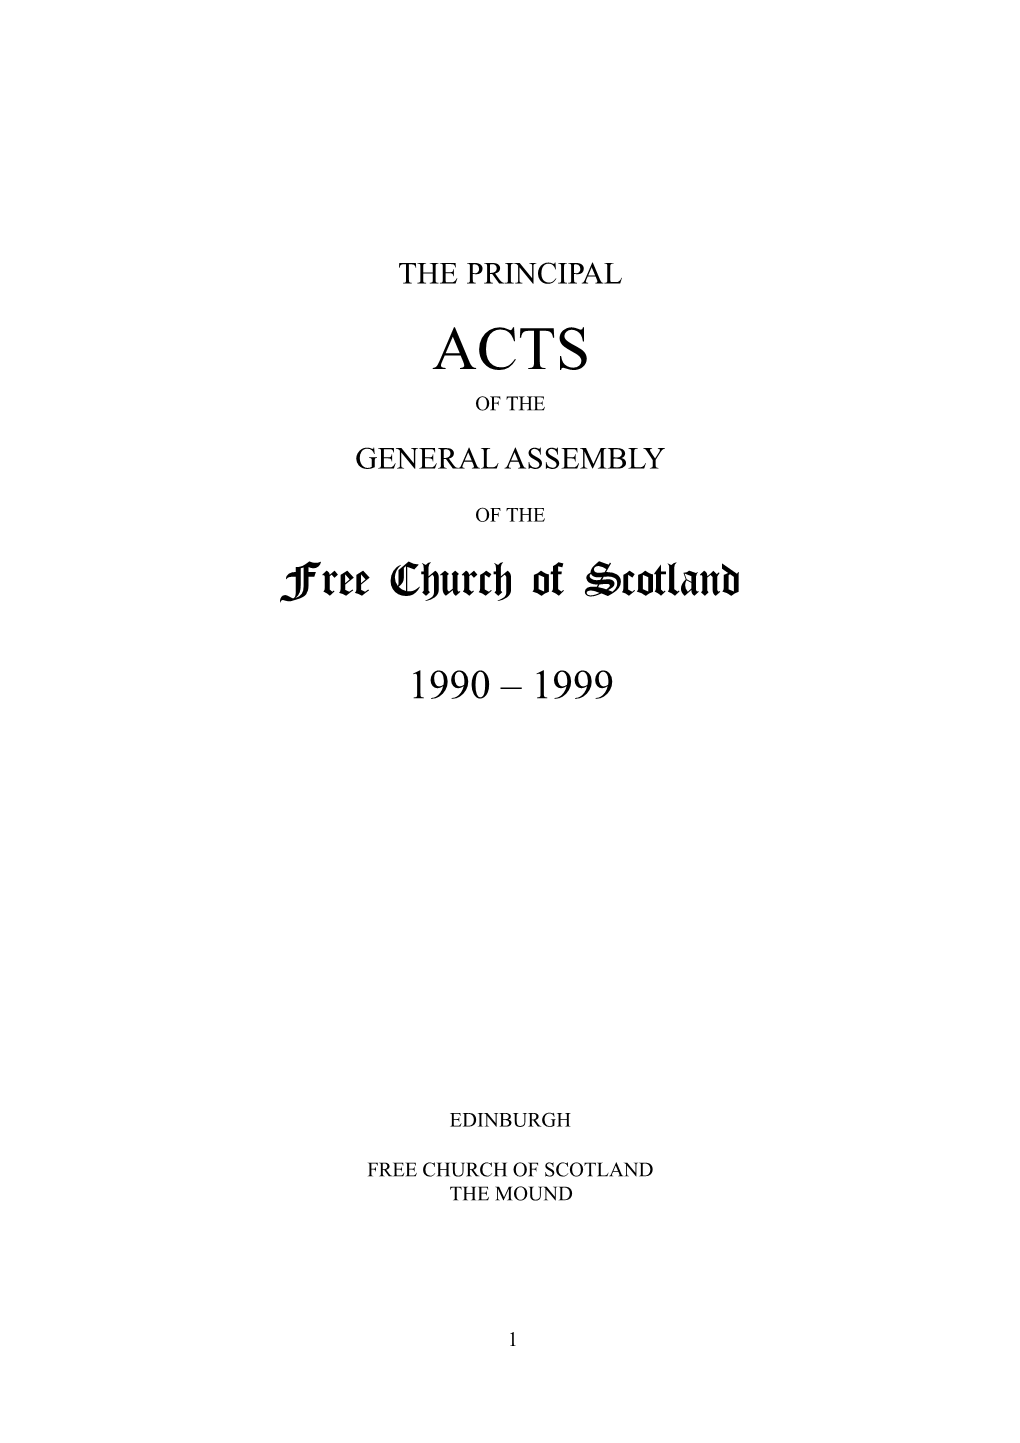 Acts 1990-1999